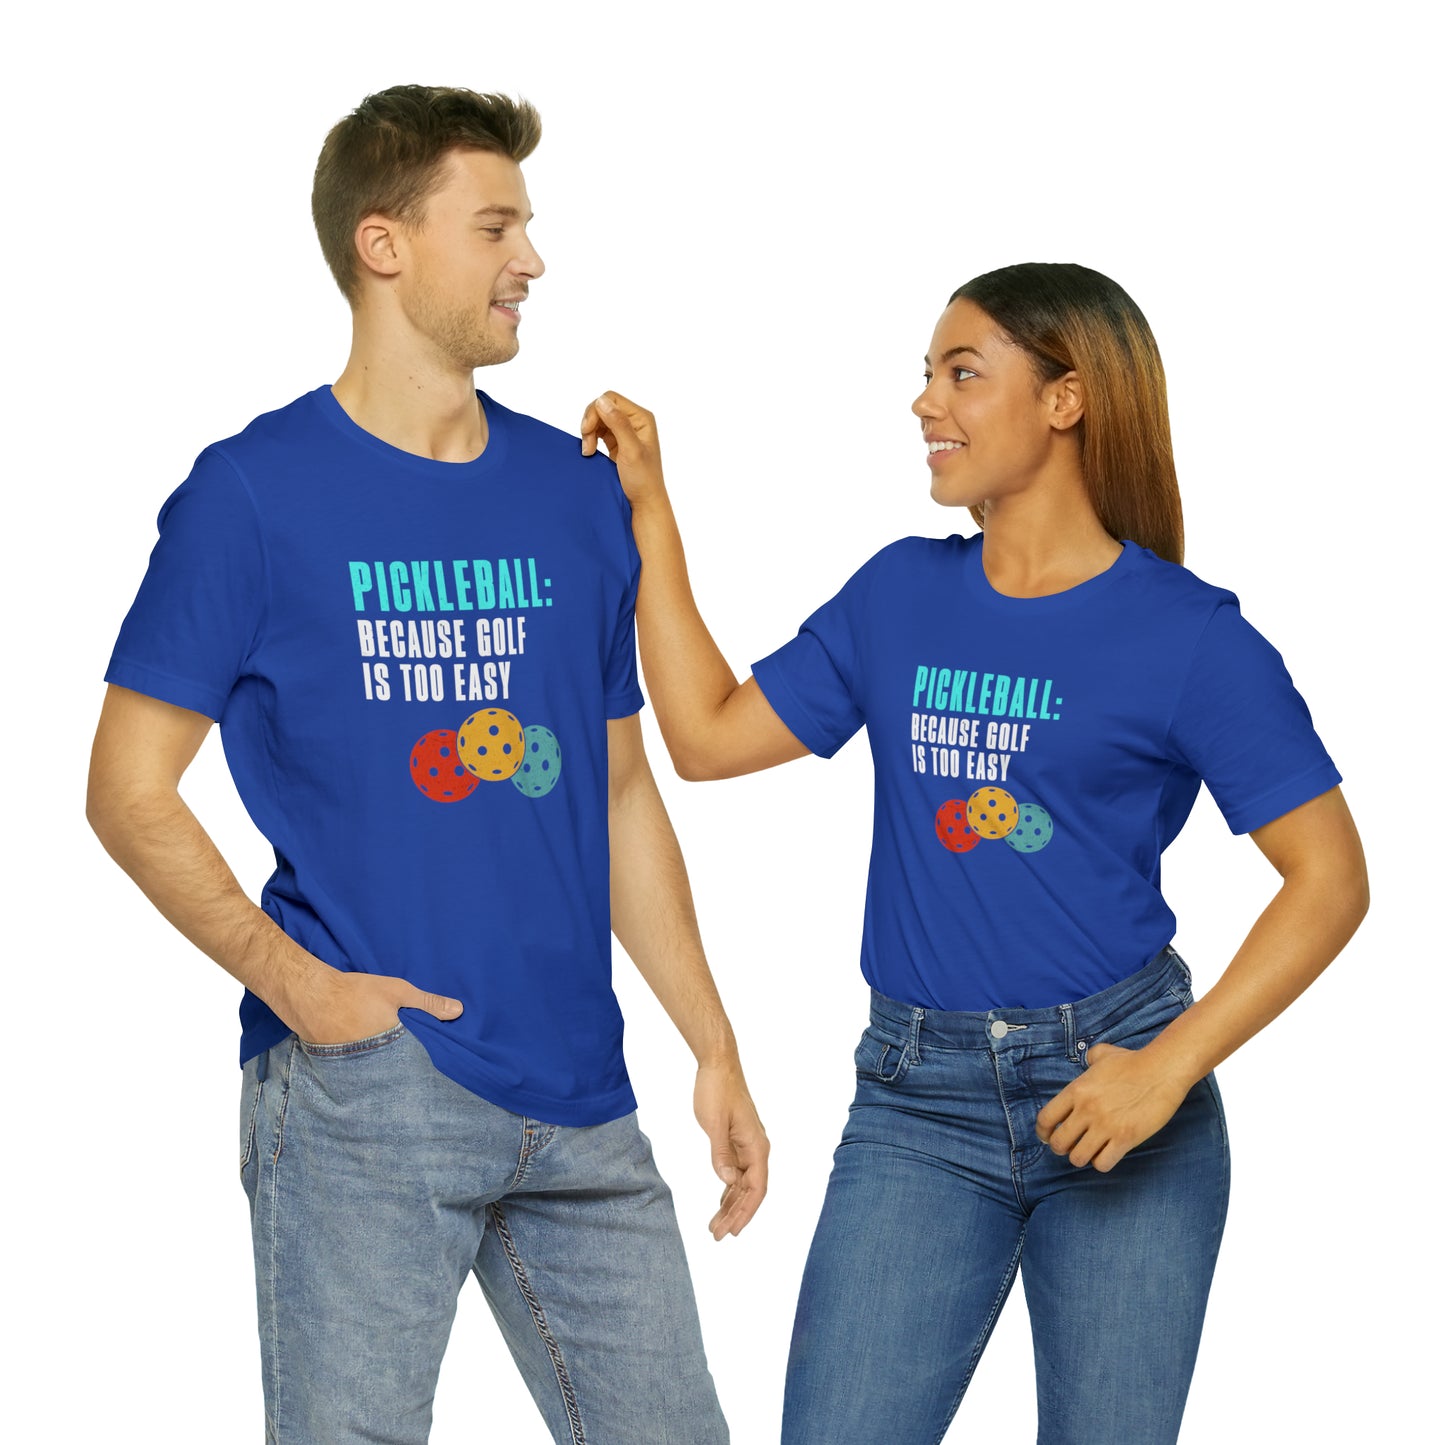 Pickleball, Because Golf is Too Easy - T-Shirt